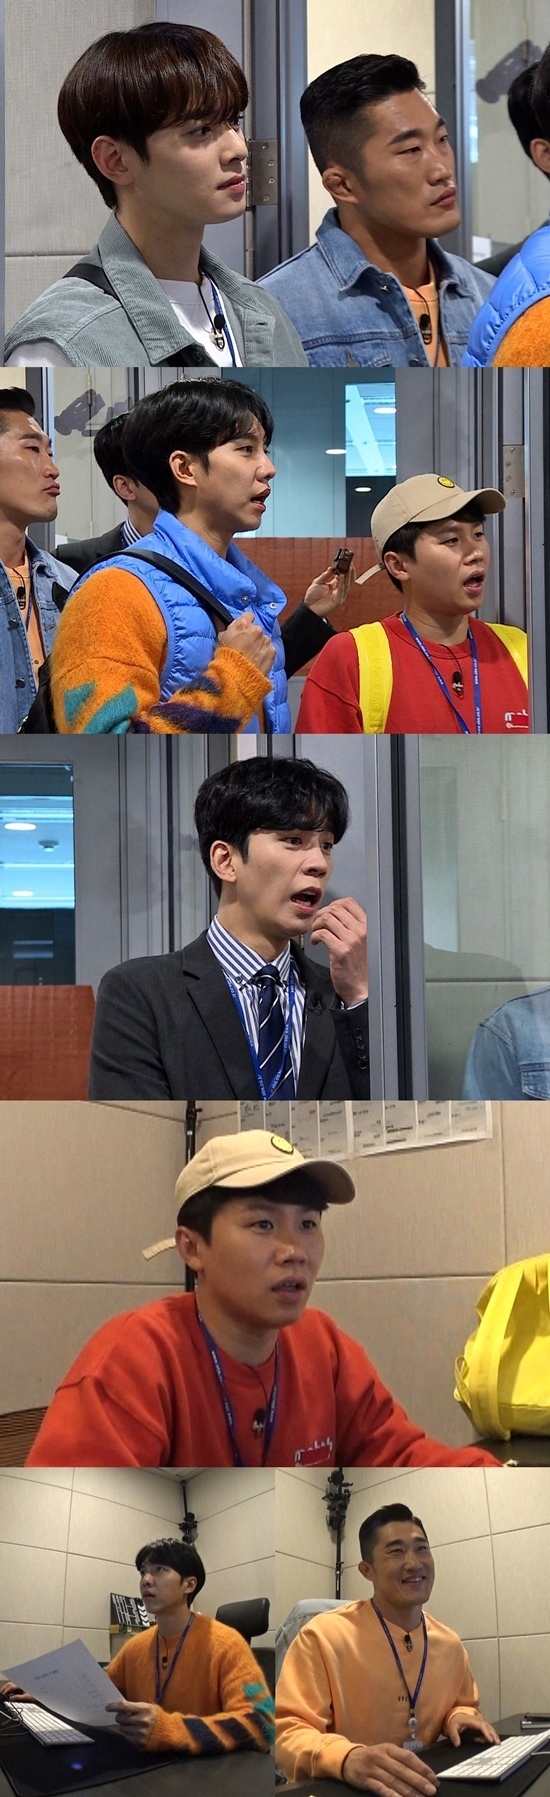 All The Butlers members suffer mental collapse in broadcast editing missionOn April 26, SBS All The Butlers will reveal Lee Seung-gi, Shin Sung-rok, Yang Se-hyeong, Cha Eun-woo and Kim Dong-Hyuns premature ability.Last week, All The Butlers was featured as a 24 oclock special feature on the station, and Lee Seung-gi, Shin Sung-rok, Yang Se-hyeong and daily students Cha Eun-woo and Kim Dong-Hyun participated in the production process of I want to know and SBS 8 News.Members will visit the Arts Bureau this time, following the Cultural and Press Bureau.The members are interested in the editing mission ahead of the final interview with the head of the entertainment department, which is the final stage of the interview with SBS new employees.Mission is to participate directly in editing the opening video of All The Butlers.Kim Dong-Hyun and Cha Eun-woo, who have been thoroughly self-centered editing since Lee Seung-gi, who has been in a bad situation, will be released with full-fledged editing videos of five men.In particular, Yang Se-hyeong listened to his comment while editing and said, Yang Se-hyeong! Do not say anything.) I was laughing because I reflected on myself. In addition, CP, who watched Kim Dong-Hyuns edited video, praised him for saying, I thought I was breathing.Park Su-in